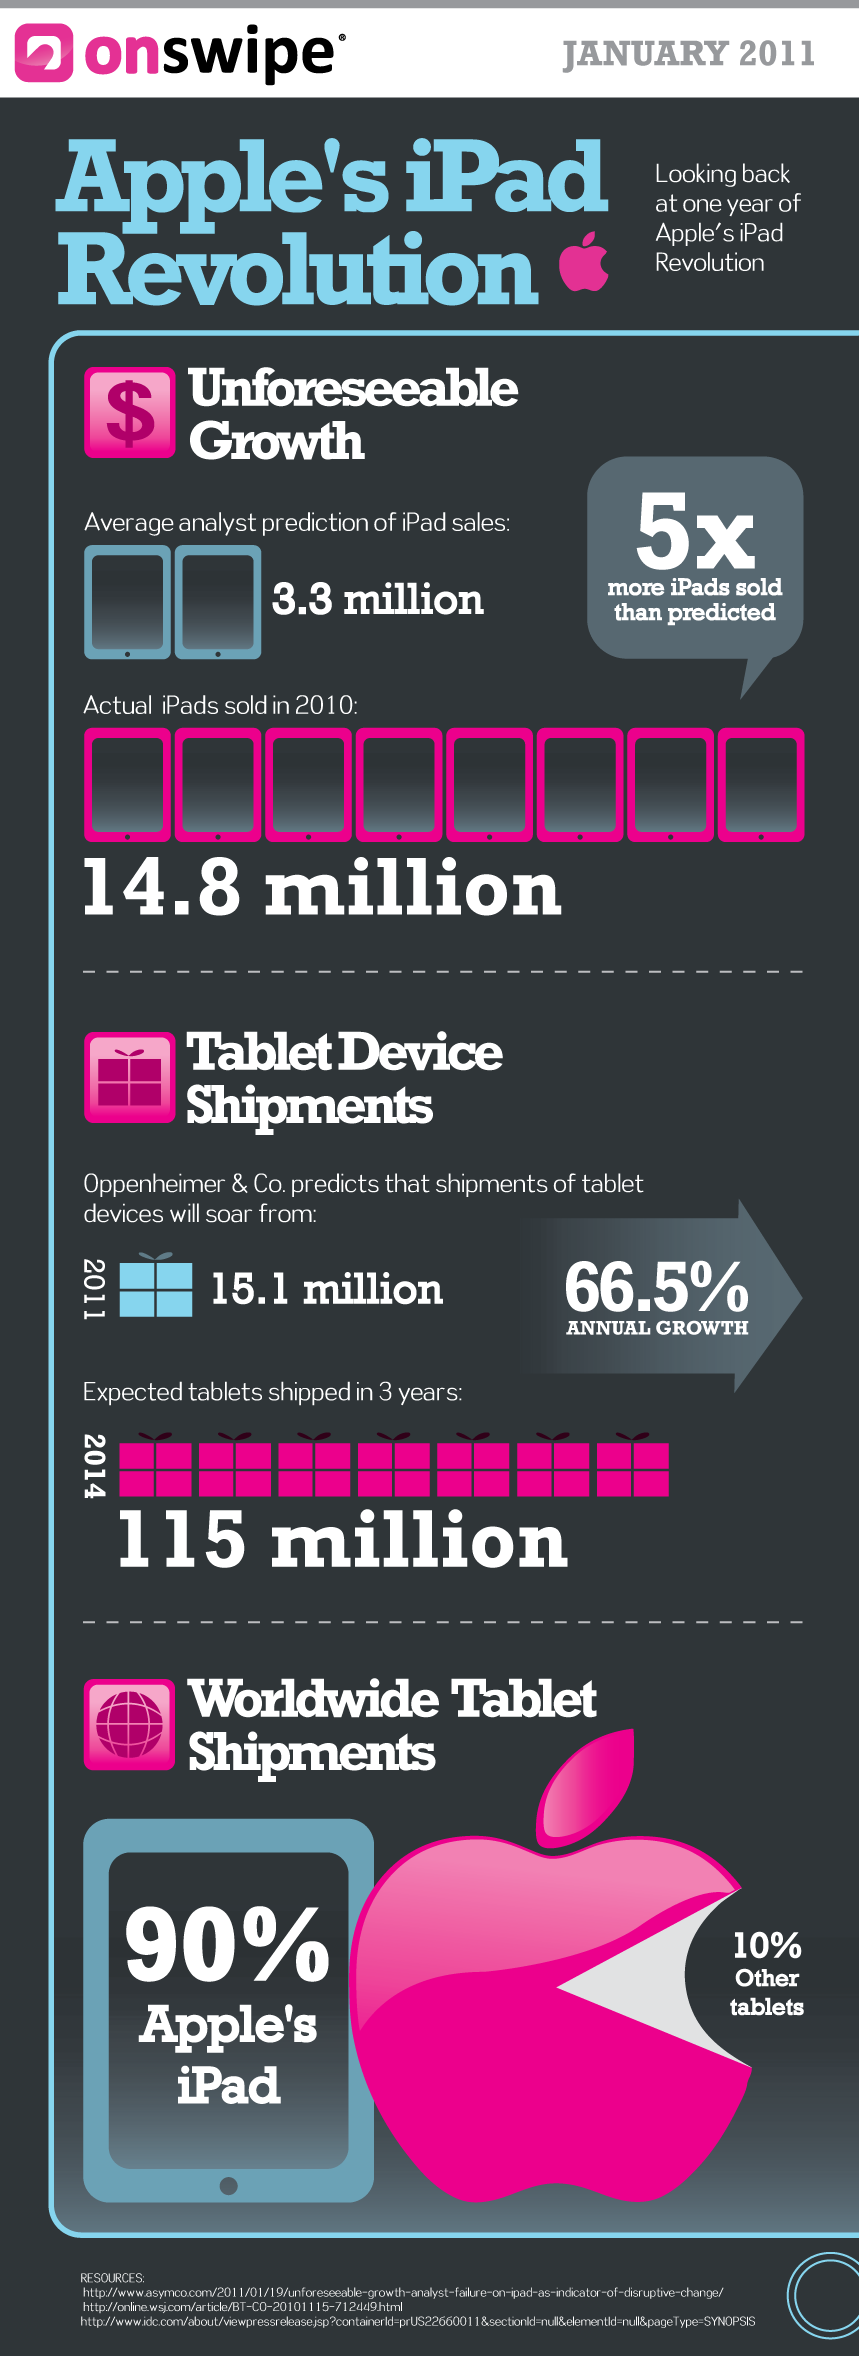 iPad-one-year-later-infographic-2011-01-27-21-48.png